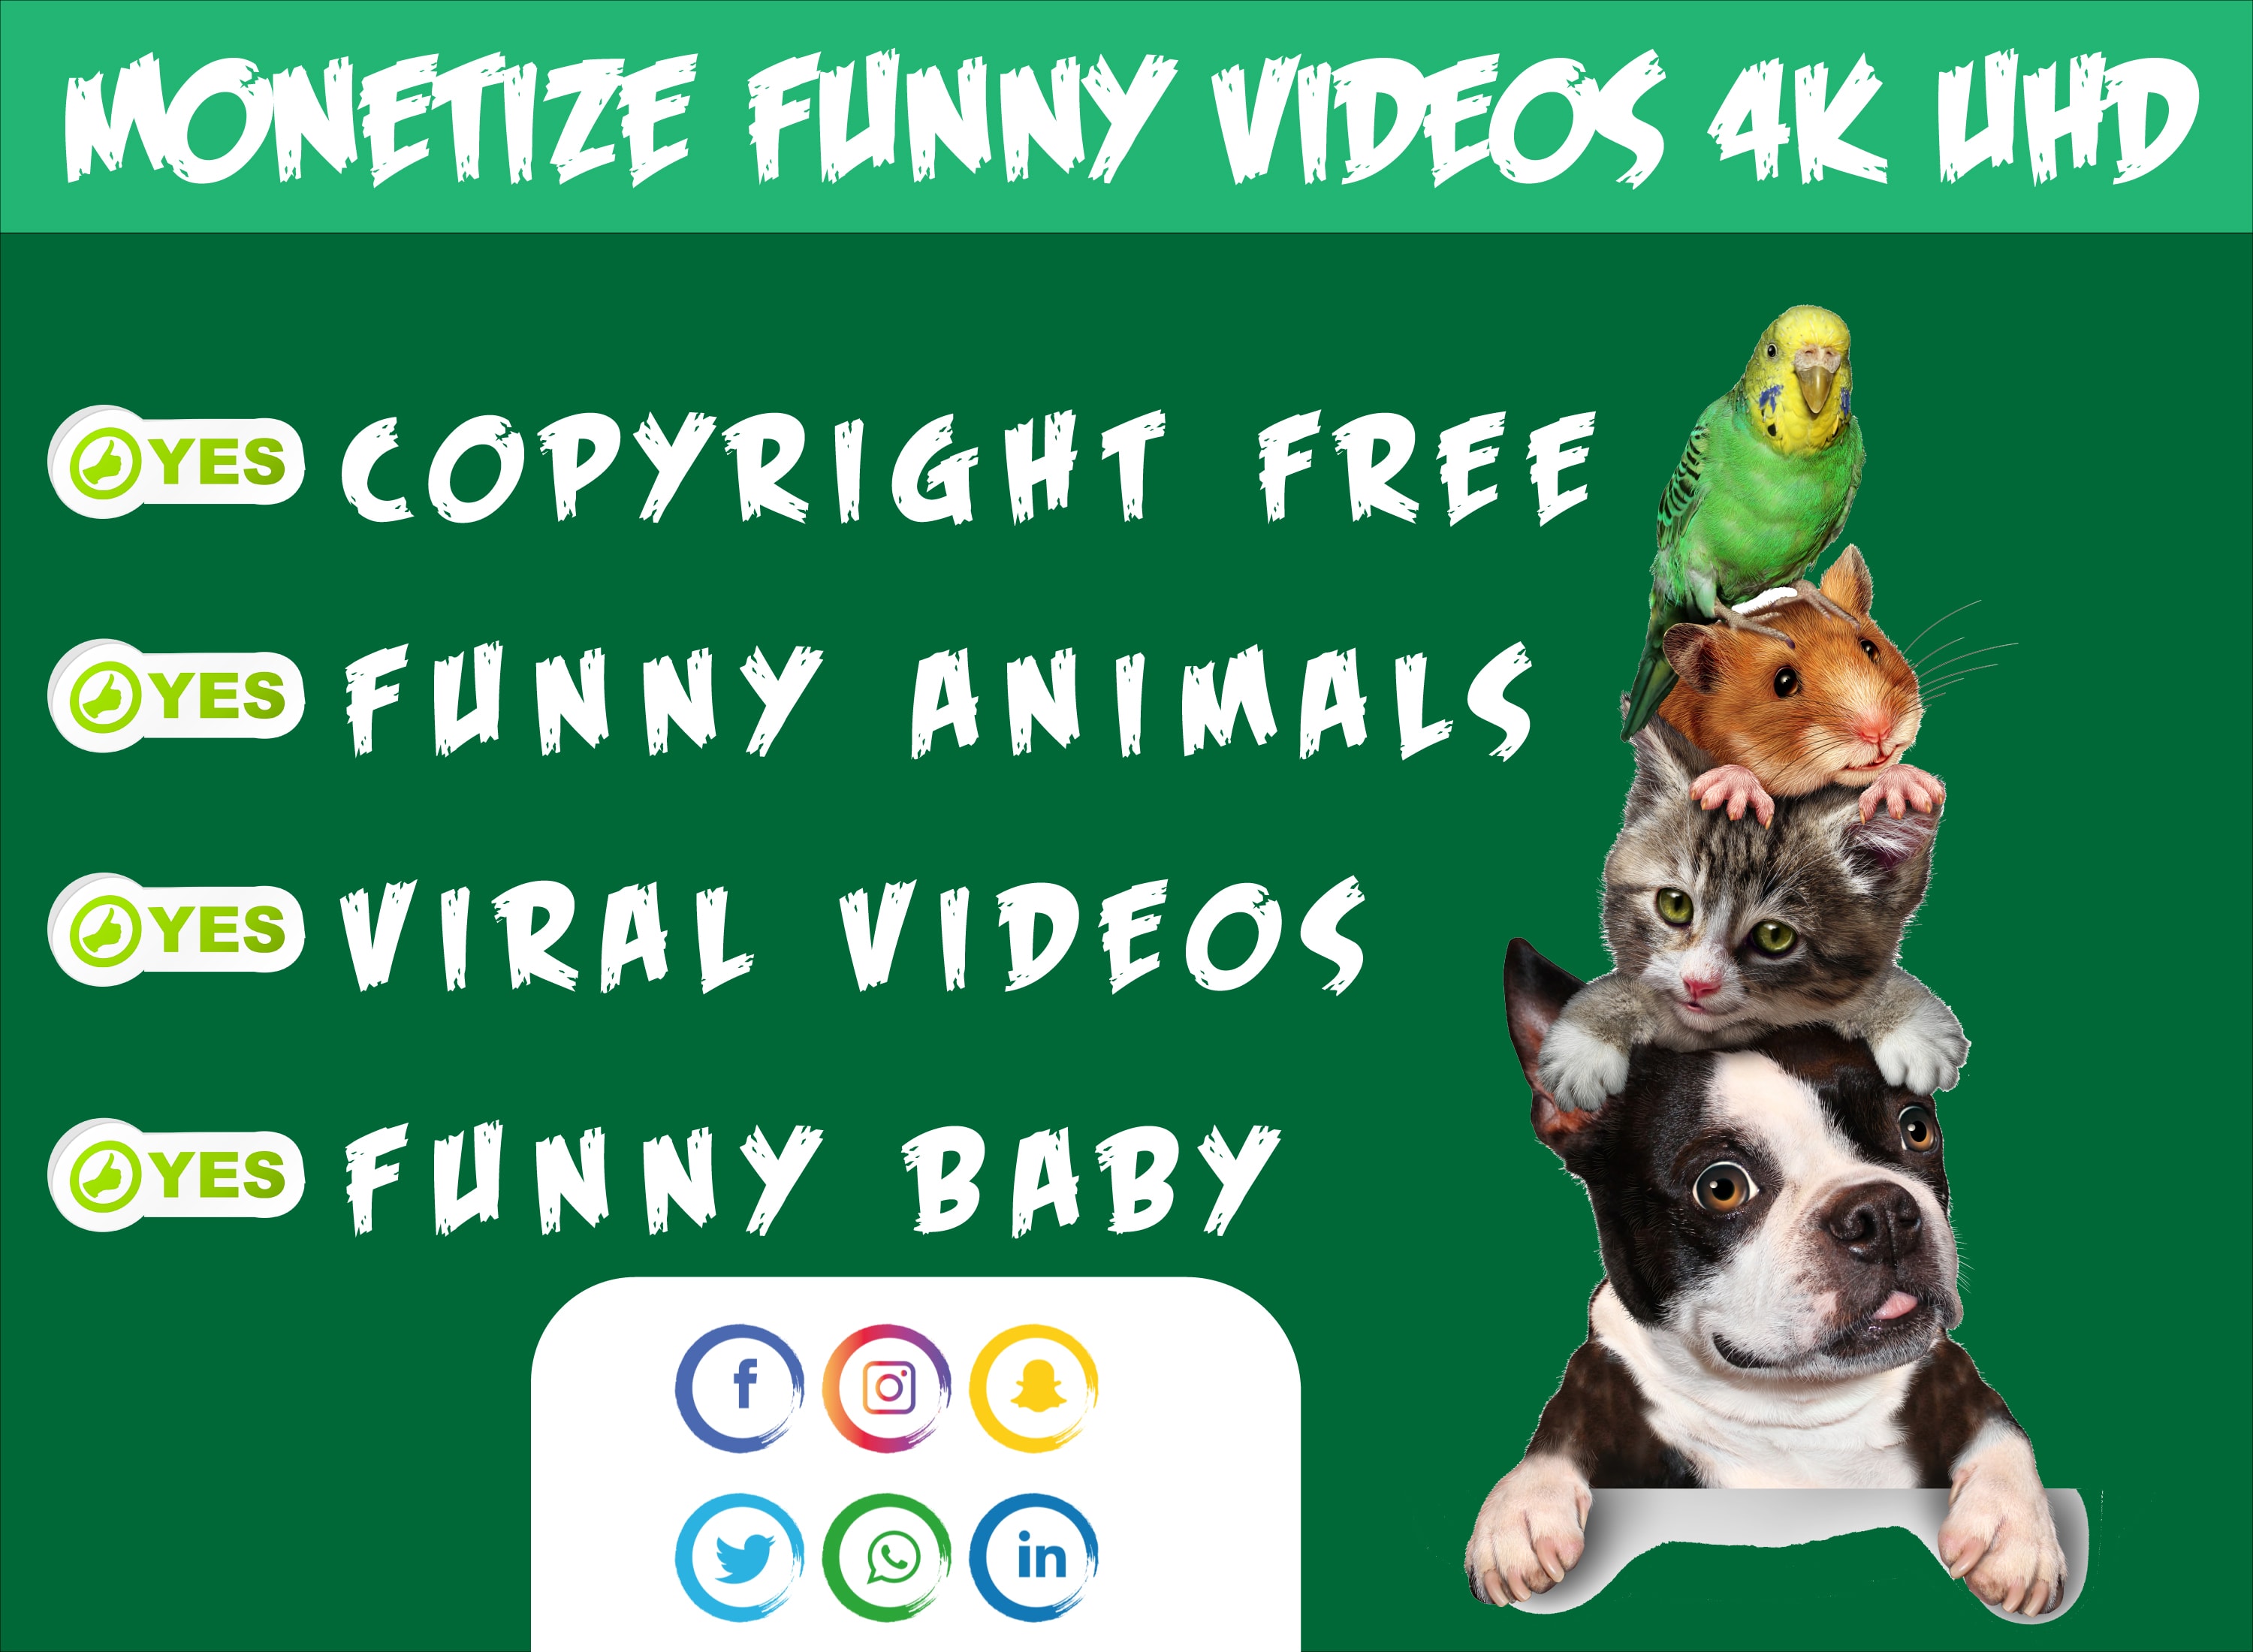 Create copyright free monetize viral animal funny video, for youtube with  logo by Kaneezzz | Fiverr